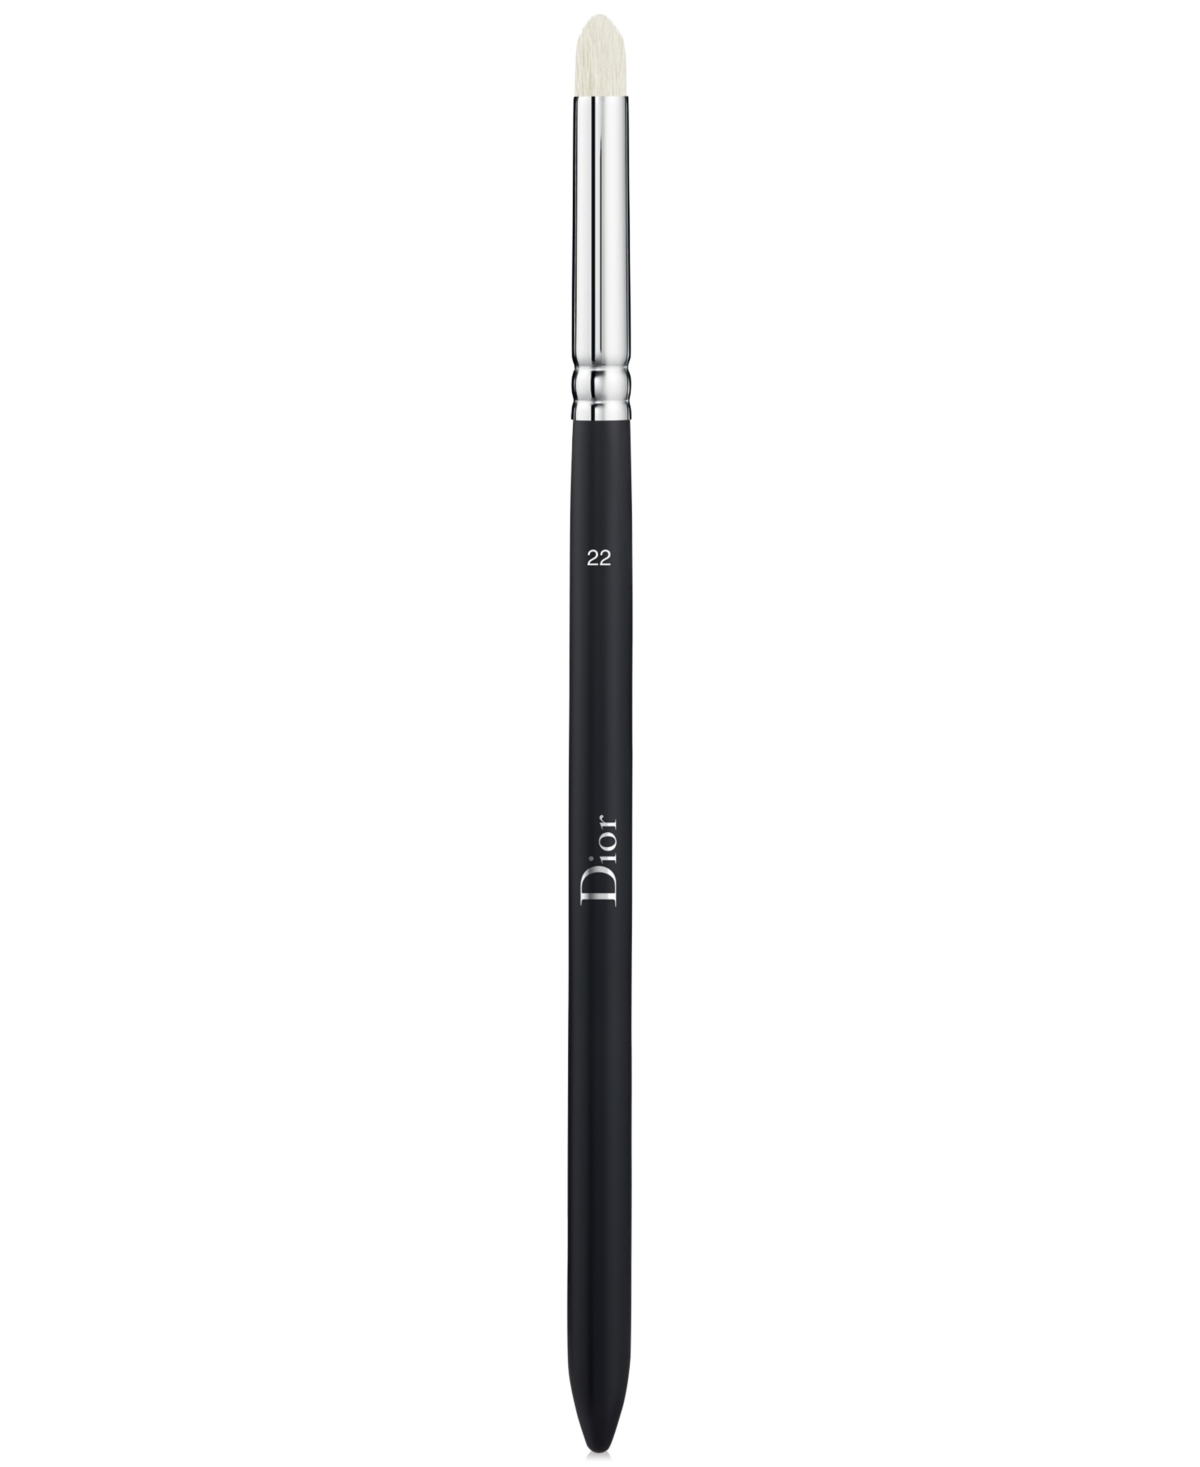 Dior Backstage Precision Eyeshadow Blending Brush Nâ°22 In No Color